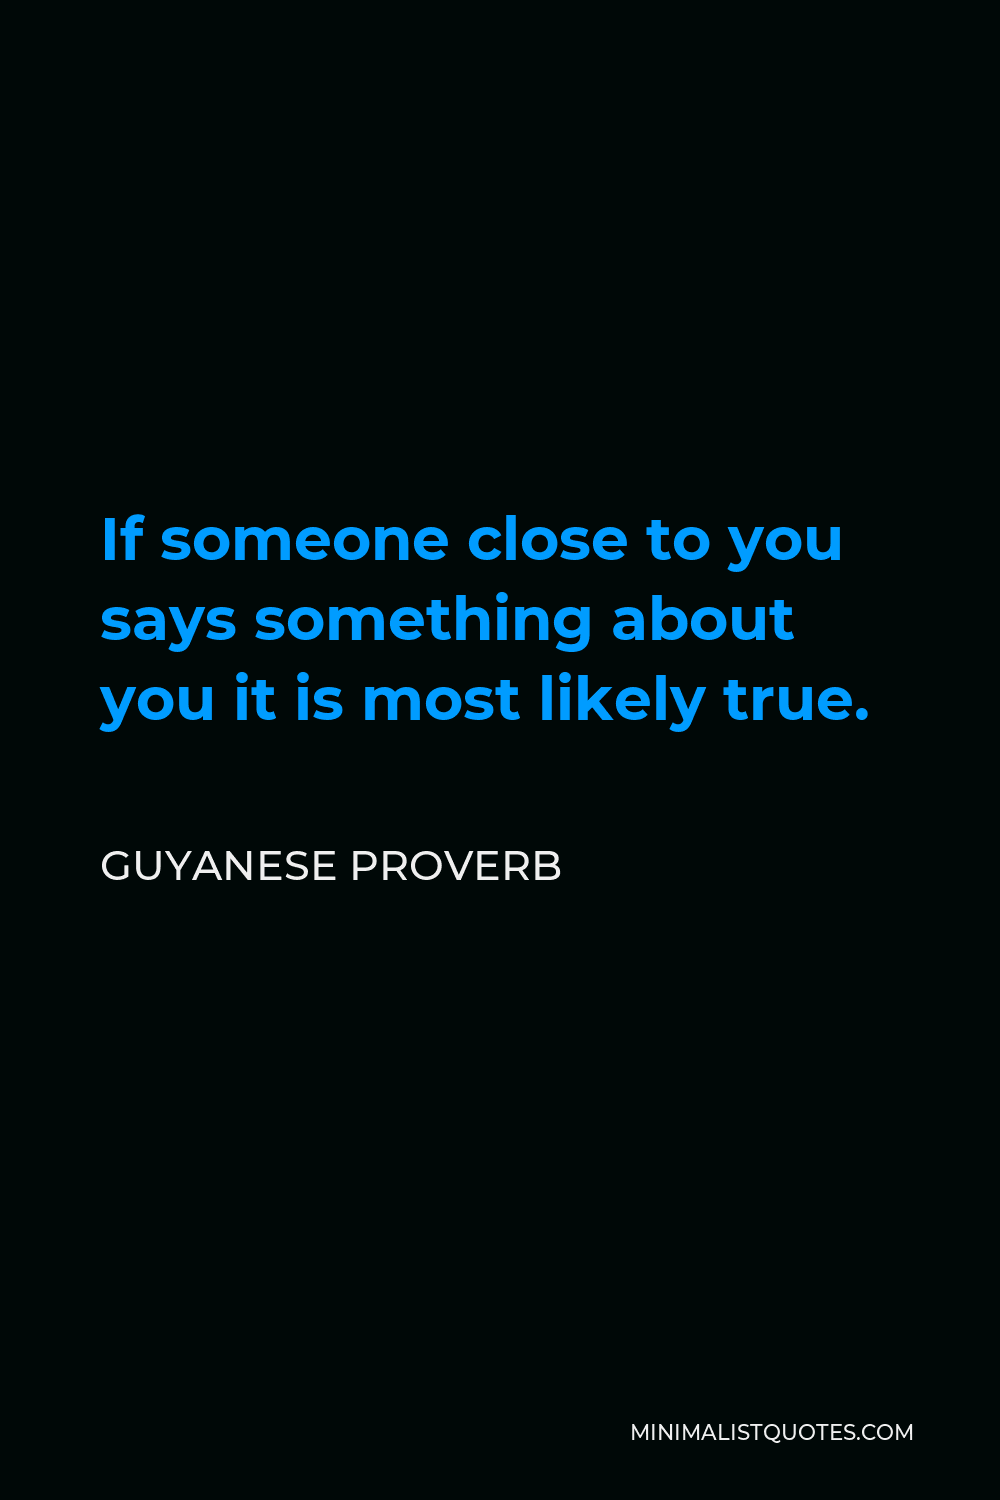 Guyanese Proverb Quote - If someone close to you says something about you it is most likely true.